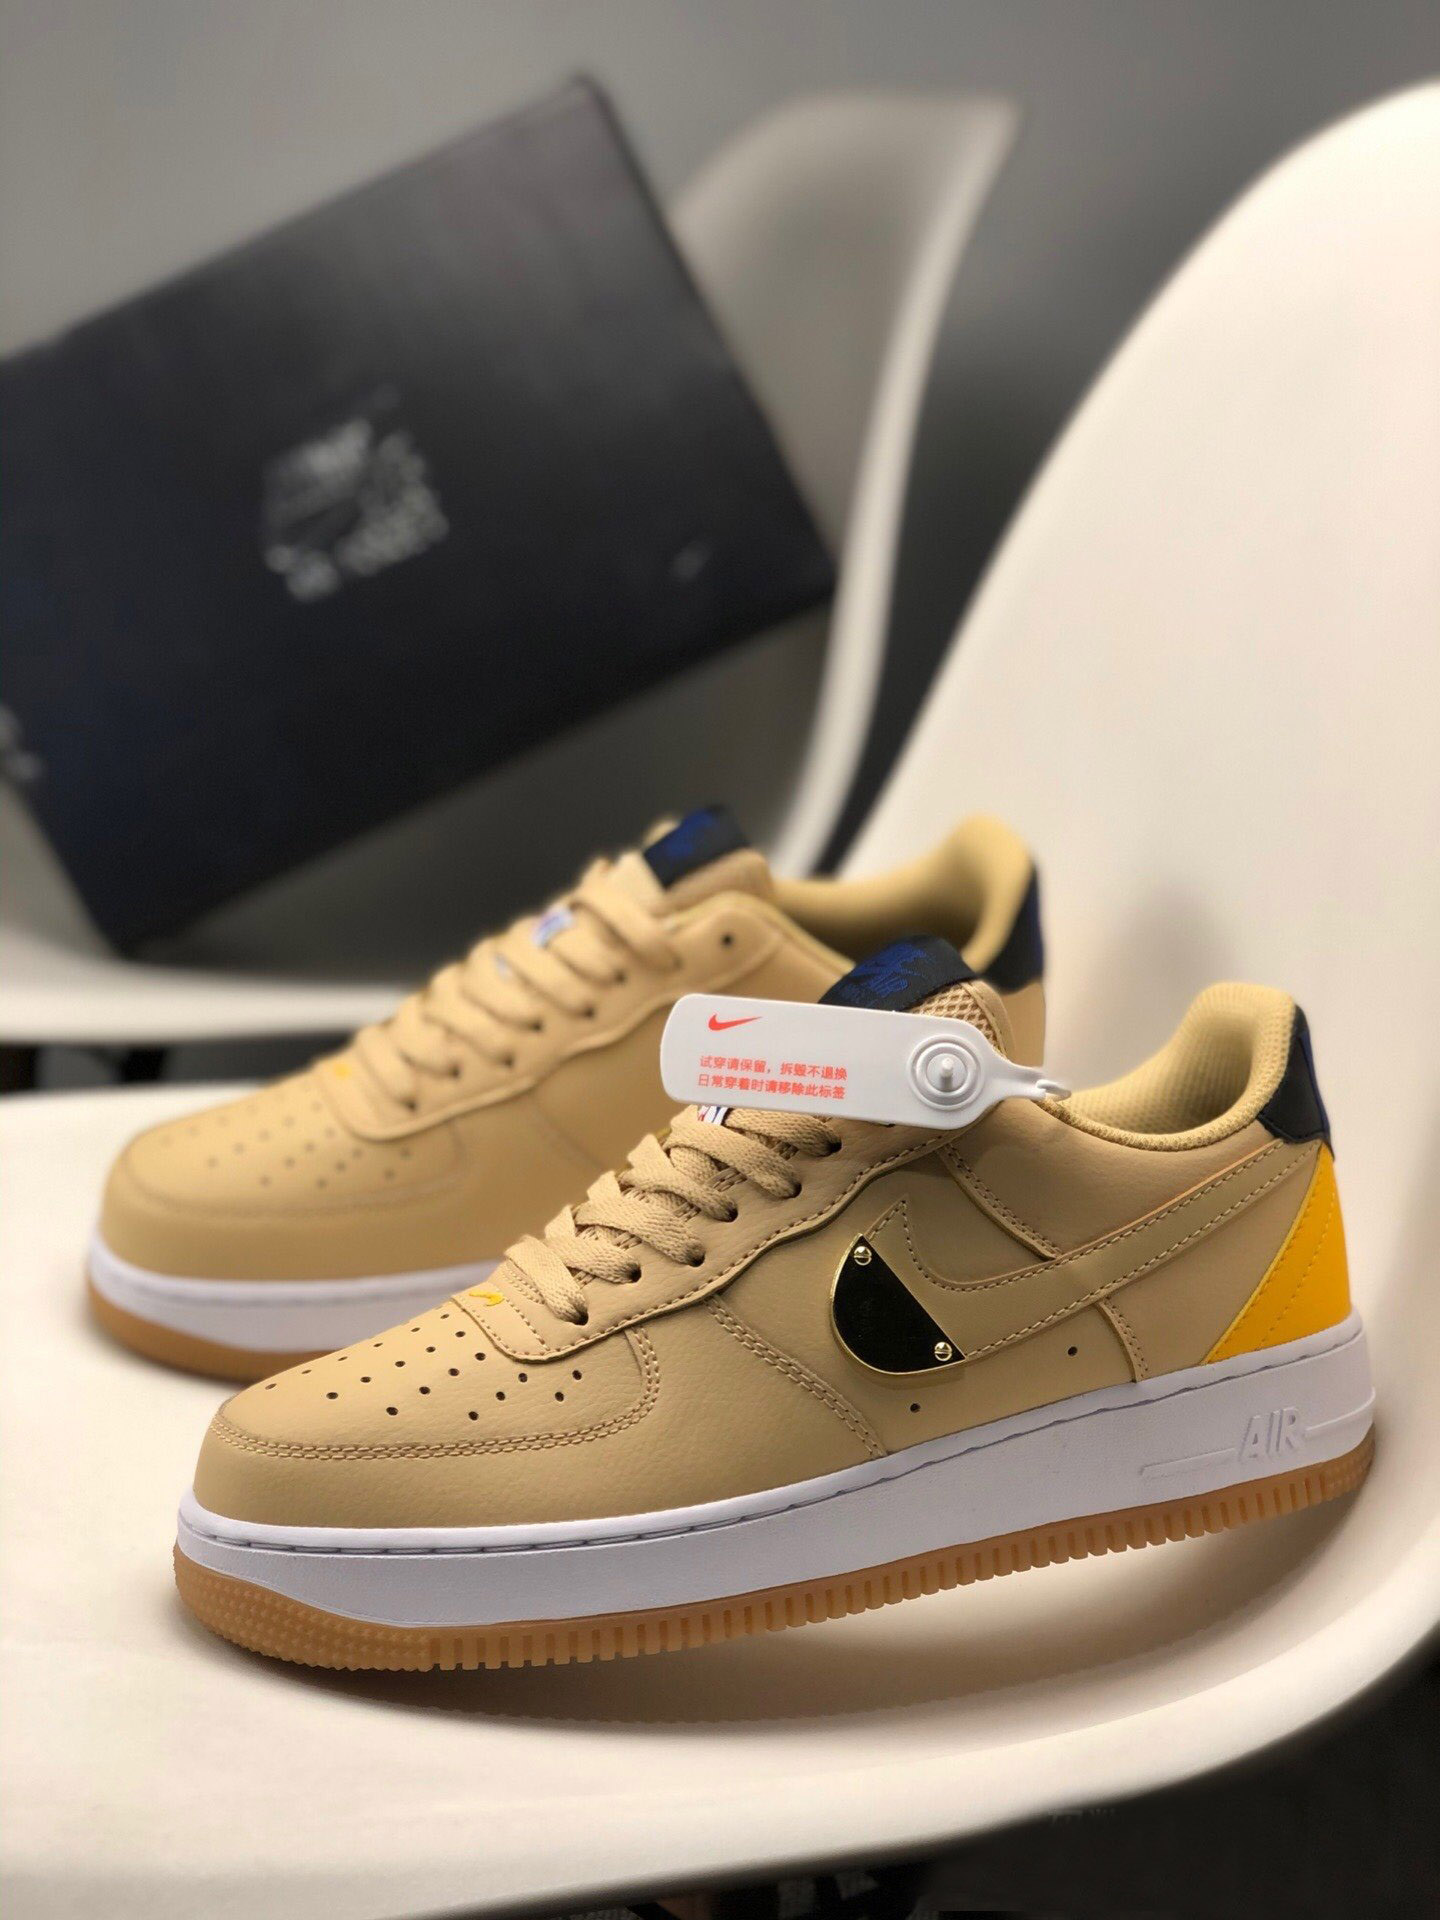 NBA x Nike Air AF Force 1 Low Tan Yellow CT2298-200 Shoes